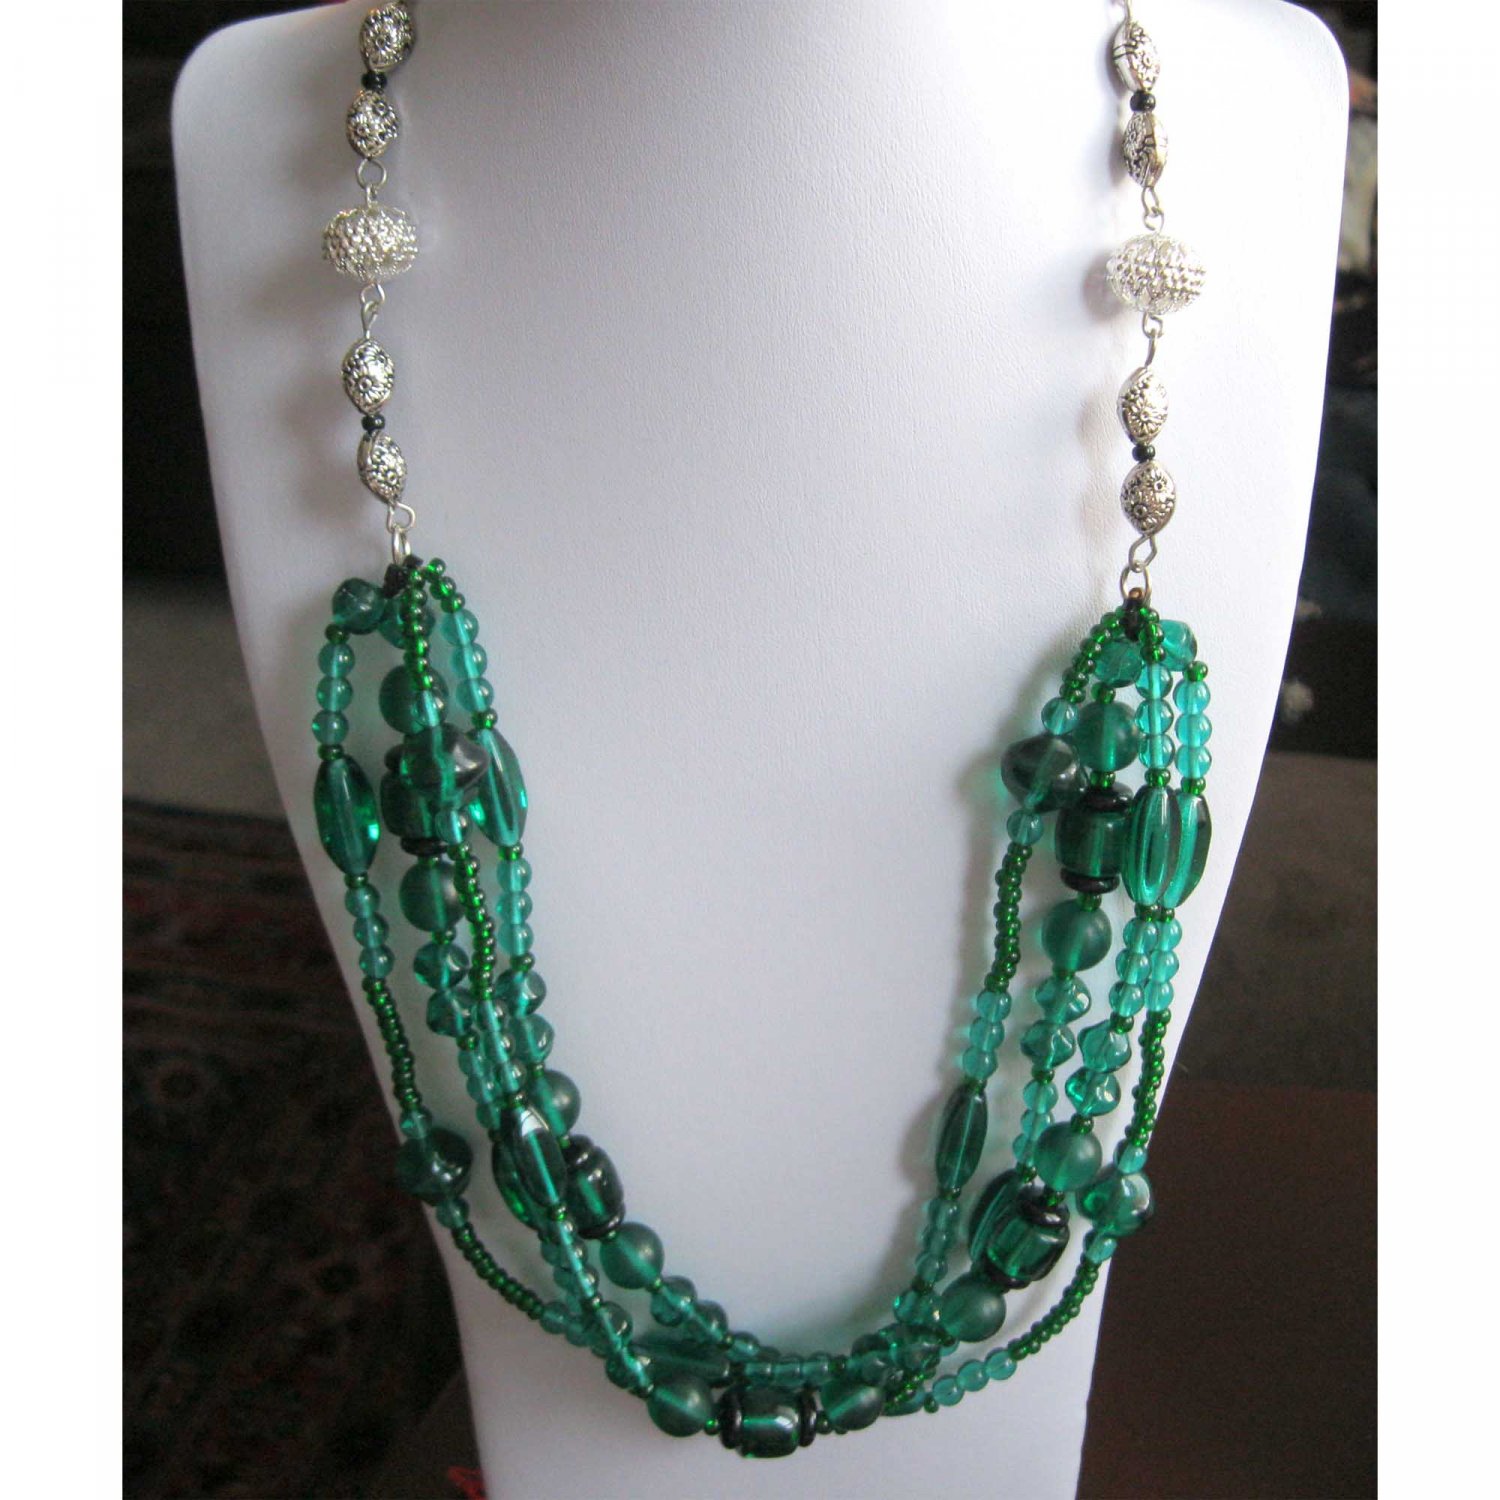 Green statement necklace with silver accents OOAK fashion jewelry